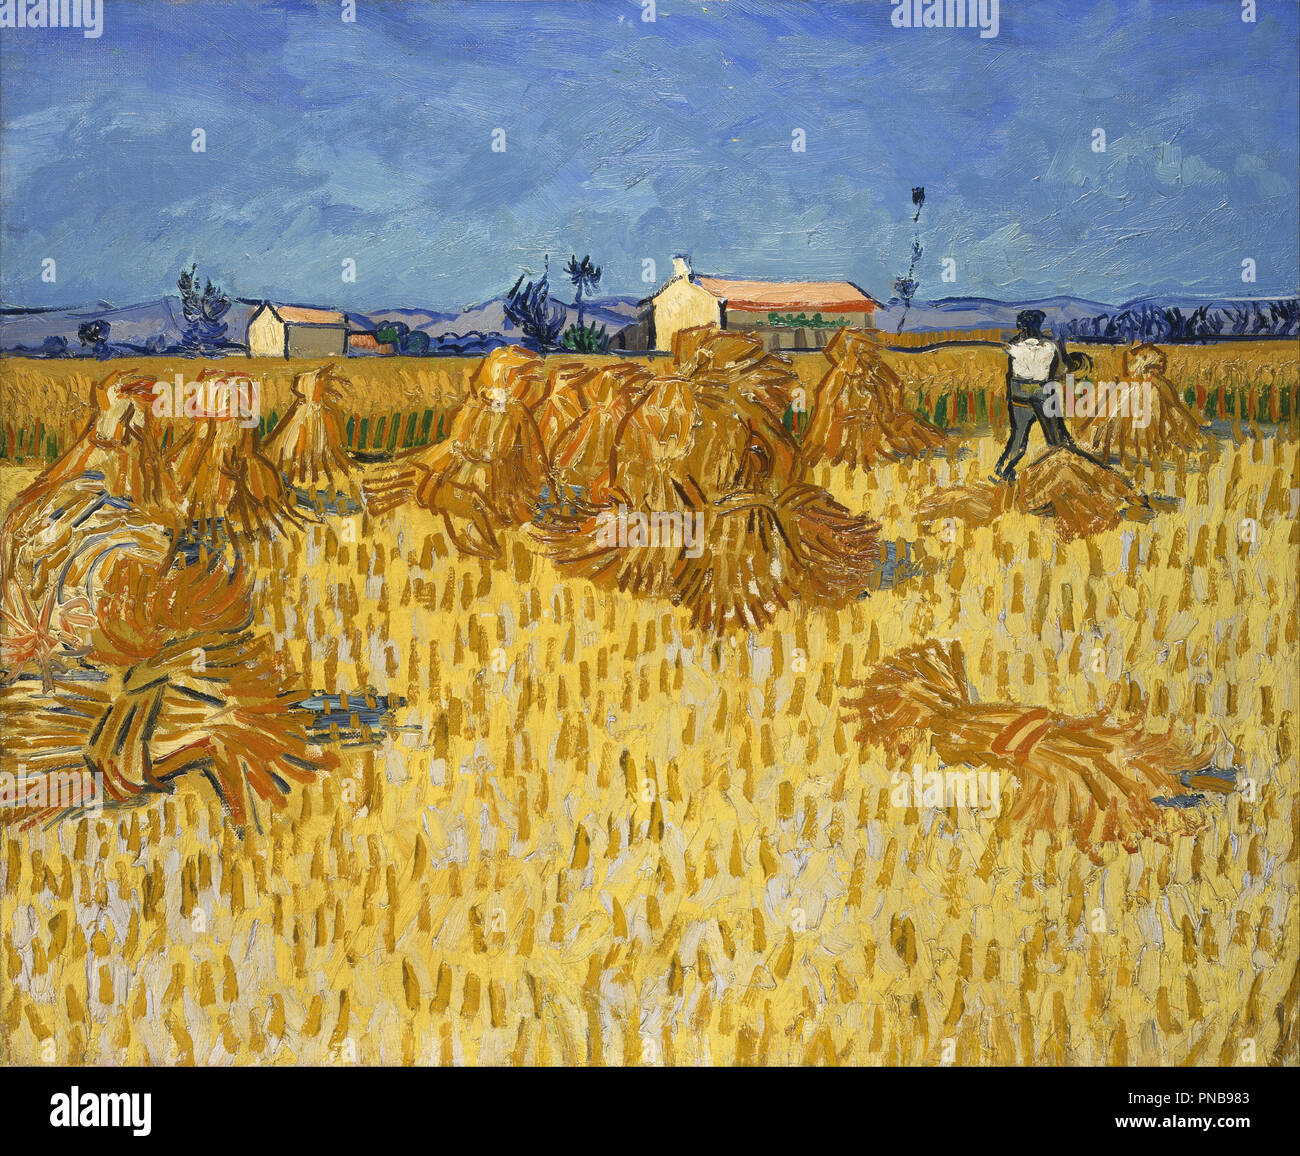 Harvest in Provence. Date/Period: 1888. Painting. Oil on canvas Oil on canvas. Author: VINCENT VAN GOGH. VAN GOGH, VINCENT. Stock Photo